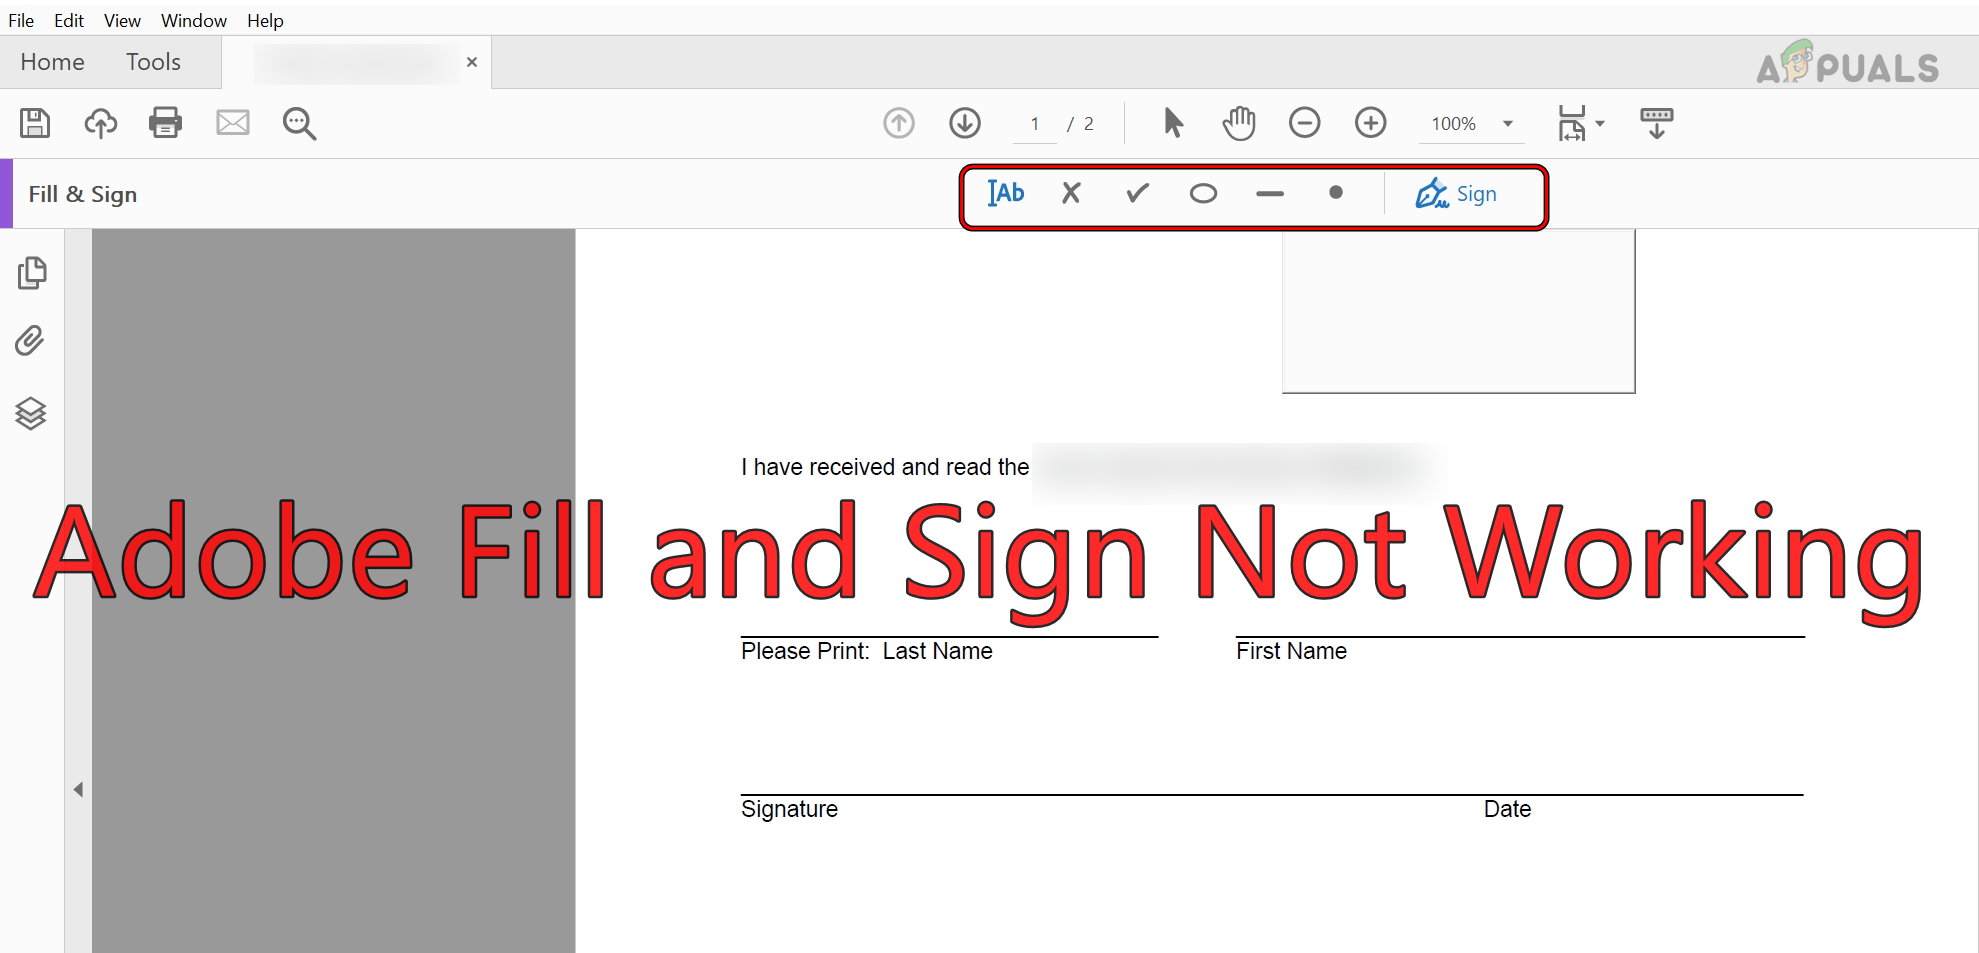 Adobe Fill and Sign Not Working